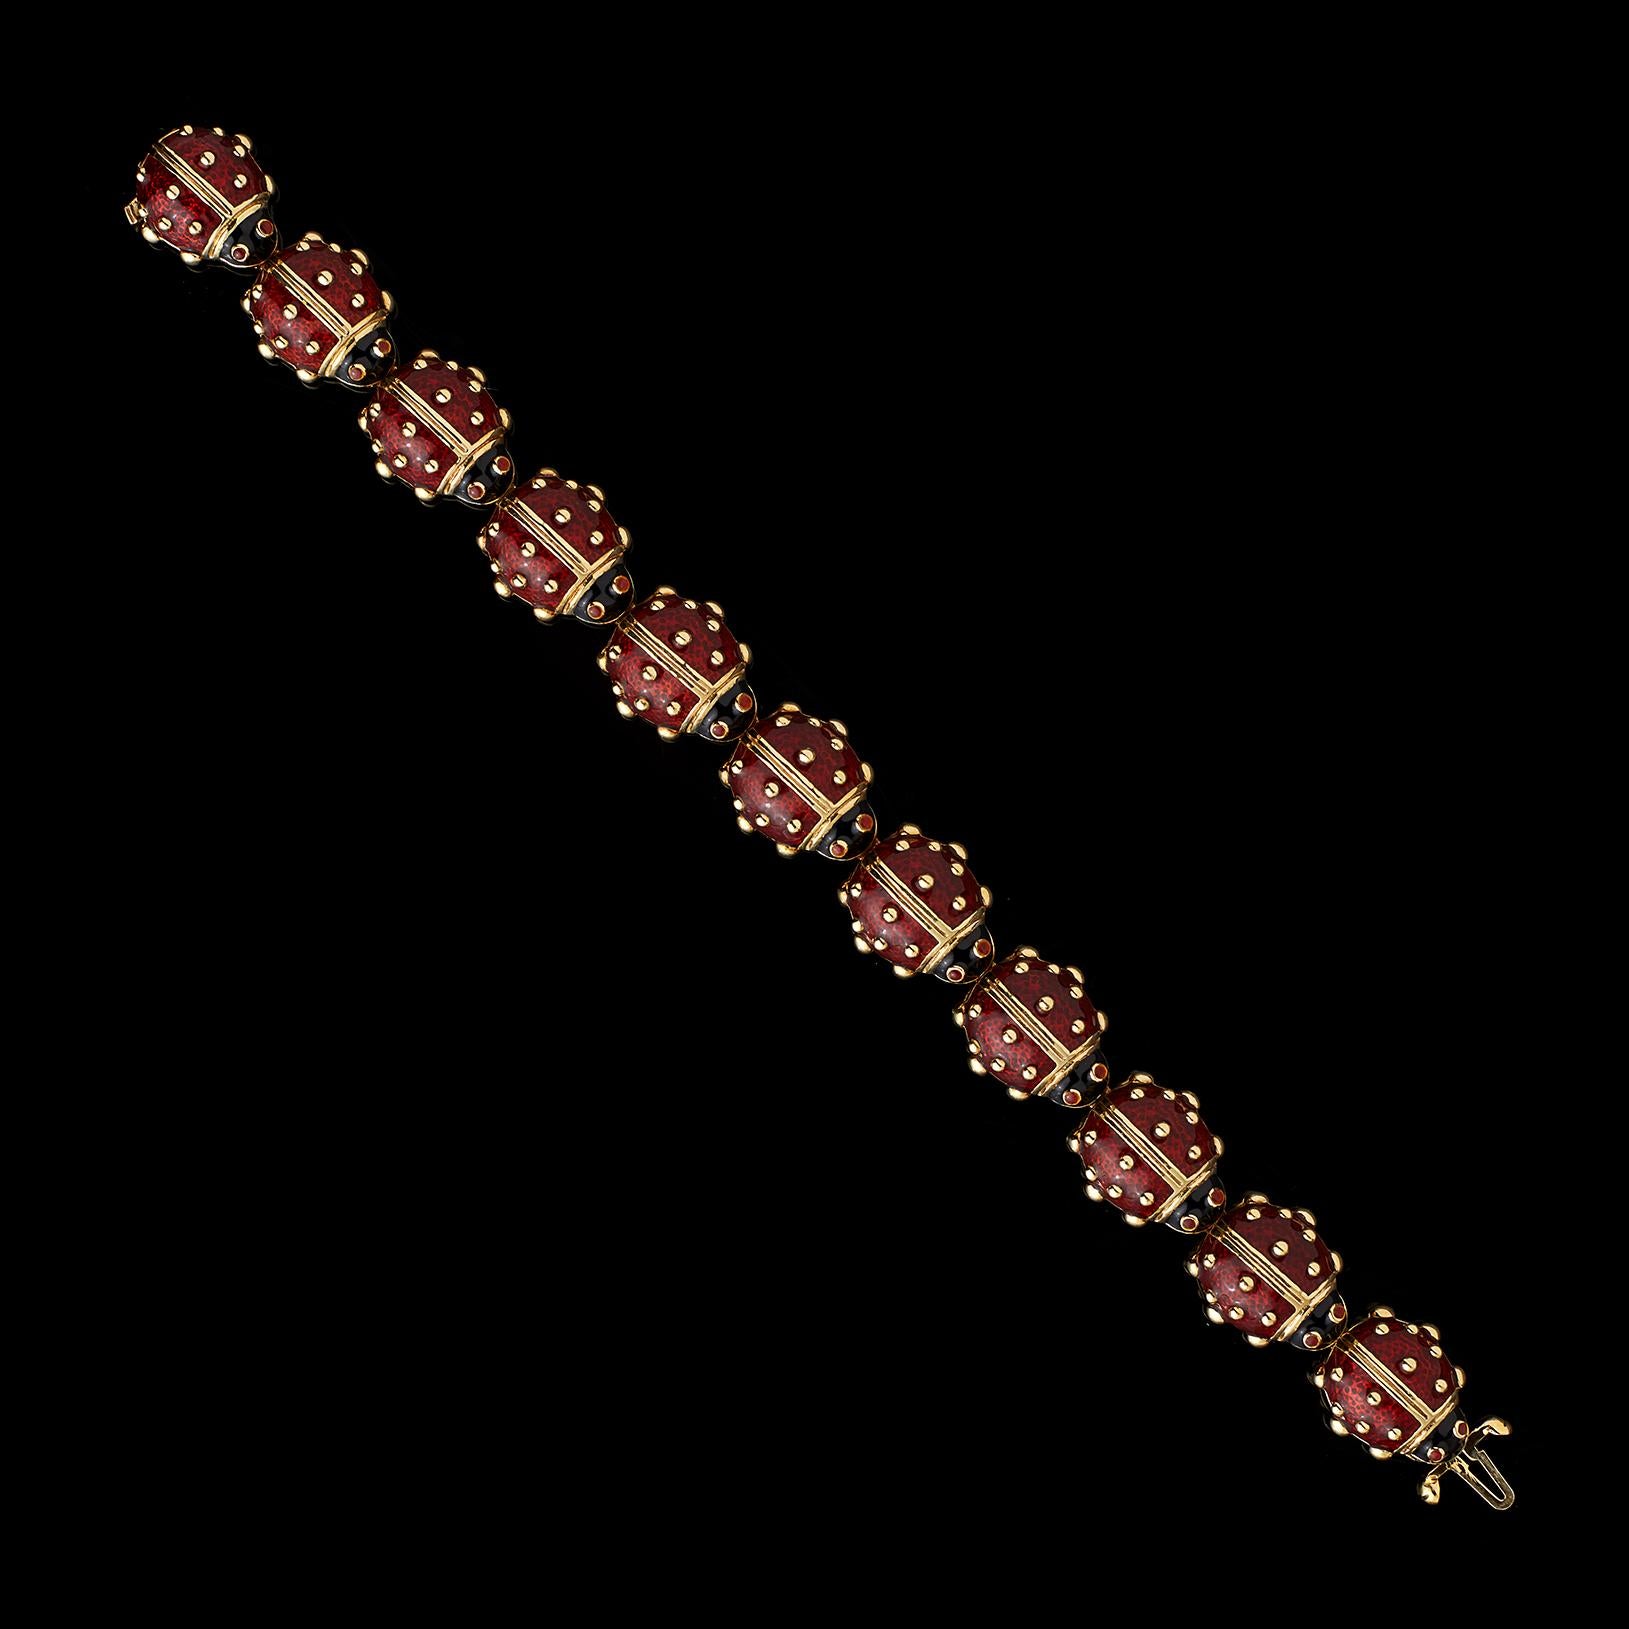 A charming Hidalgo link bracelet circa 1993 designed with 11 enameled ladybugs, this piece is sure to bring good luck! The bracelet weighs 44.1 grams and measures approximately 6 7/8 inches. A rare find, sure to be a welcomed addition to any